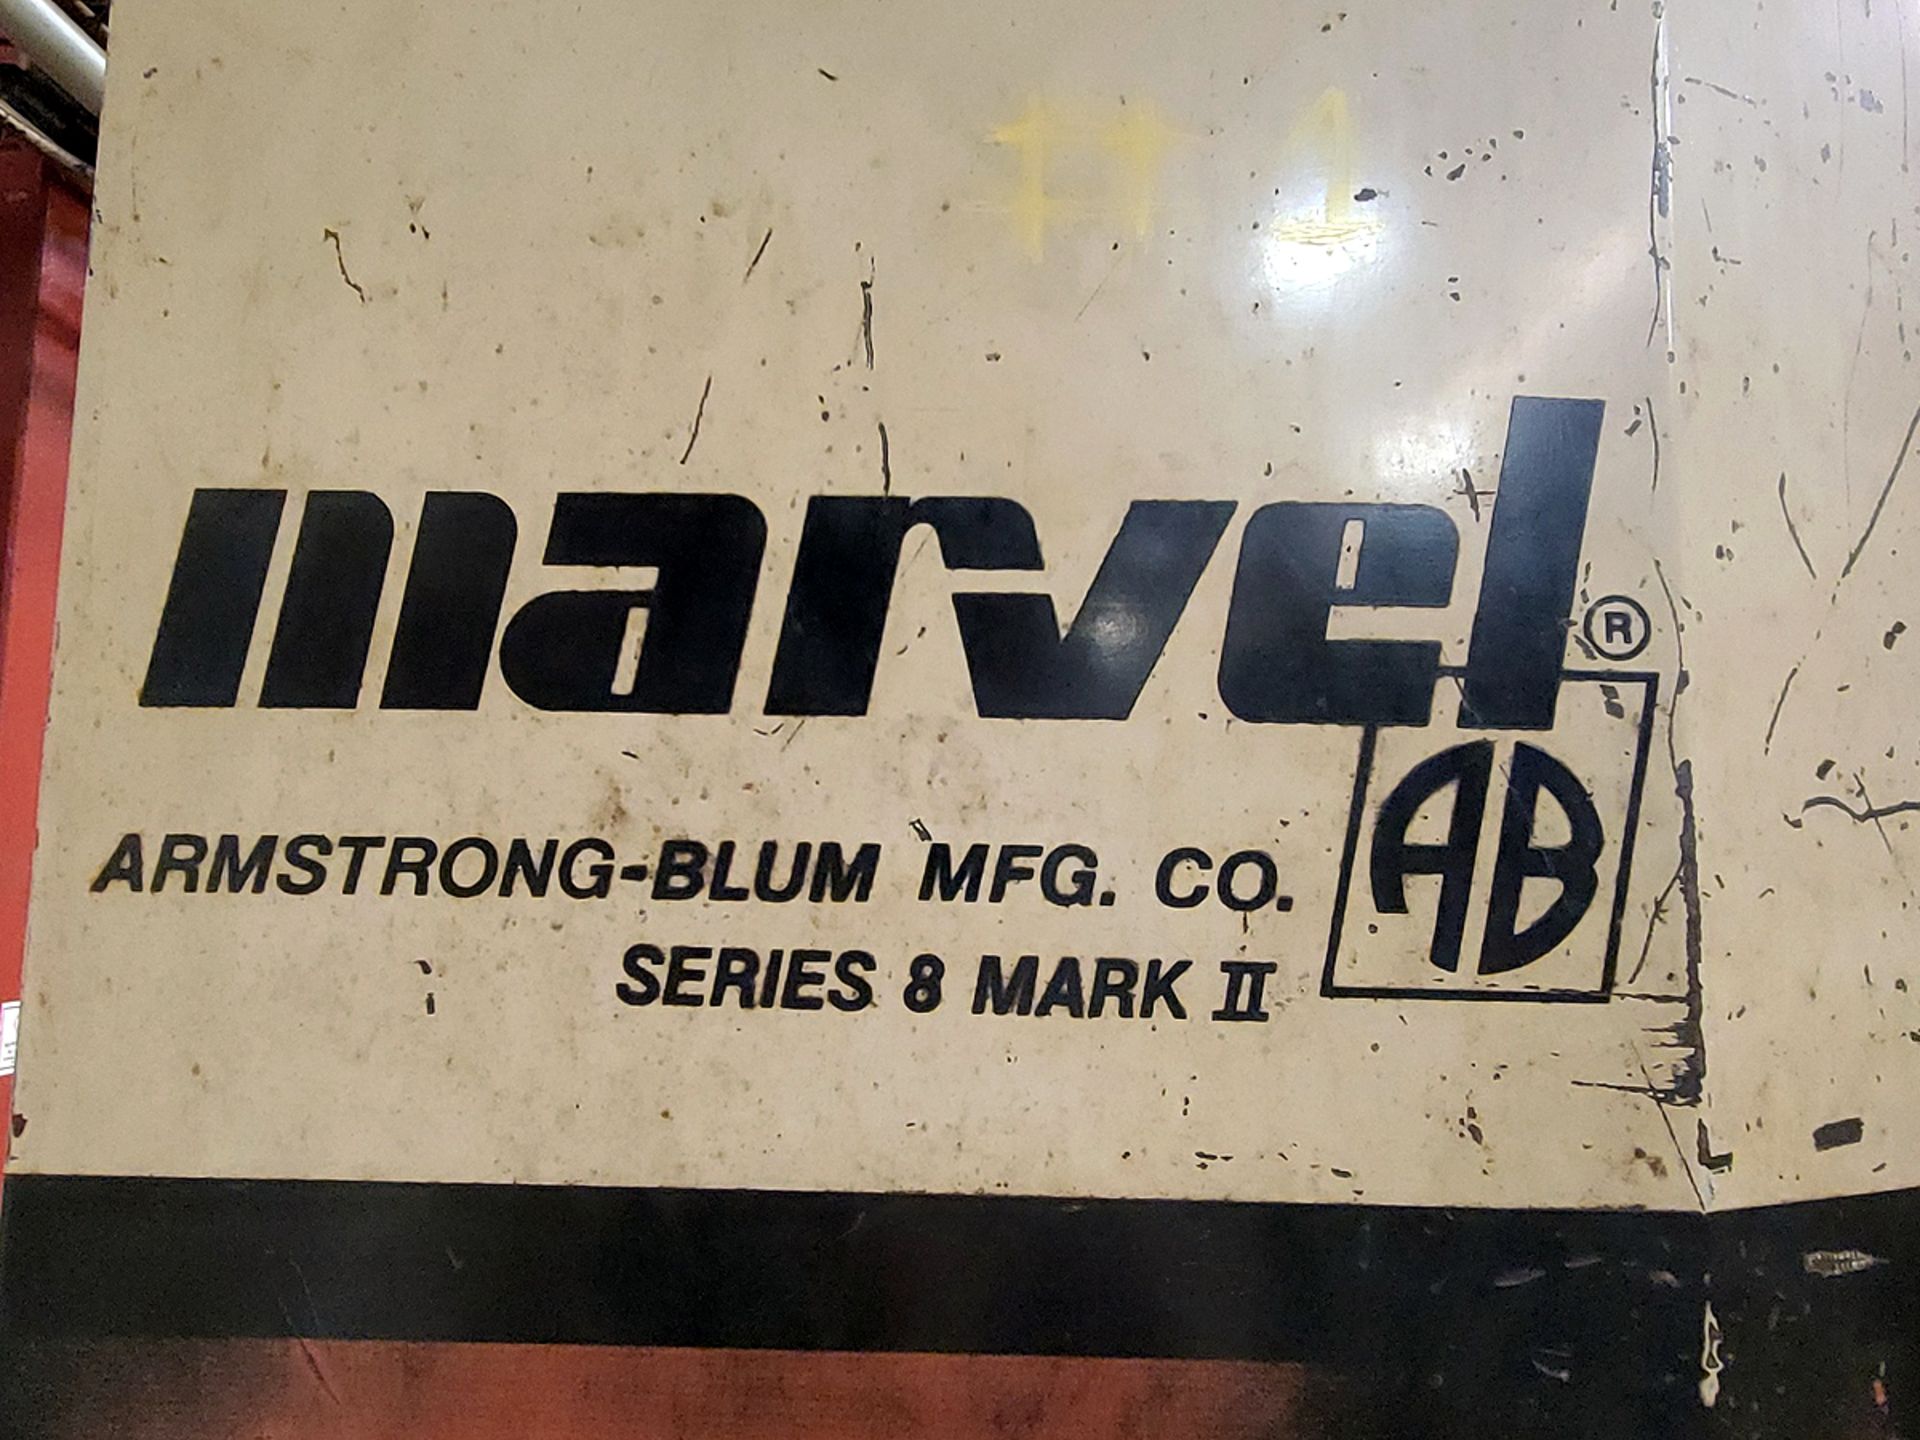 Marvel Series 8 Mark II Vertical Band Saw - Image 4 of 8